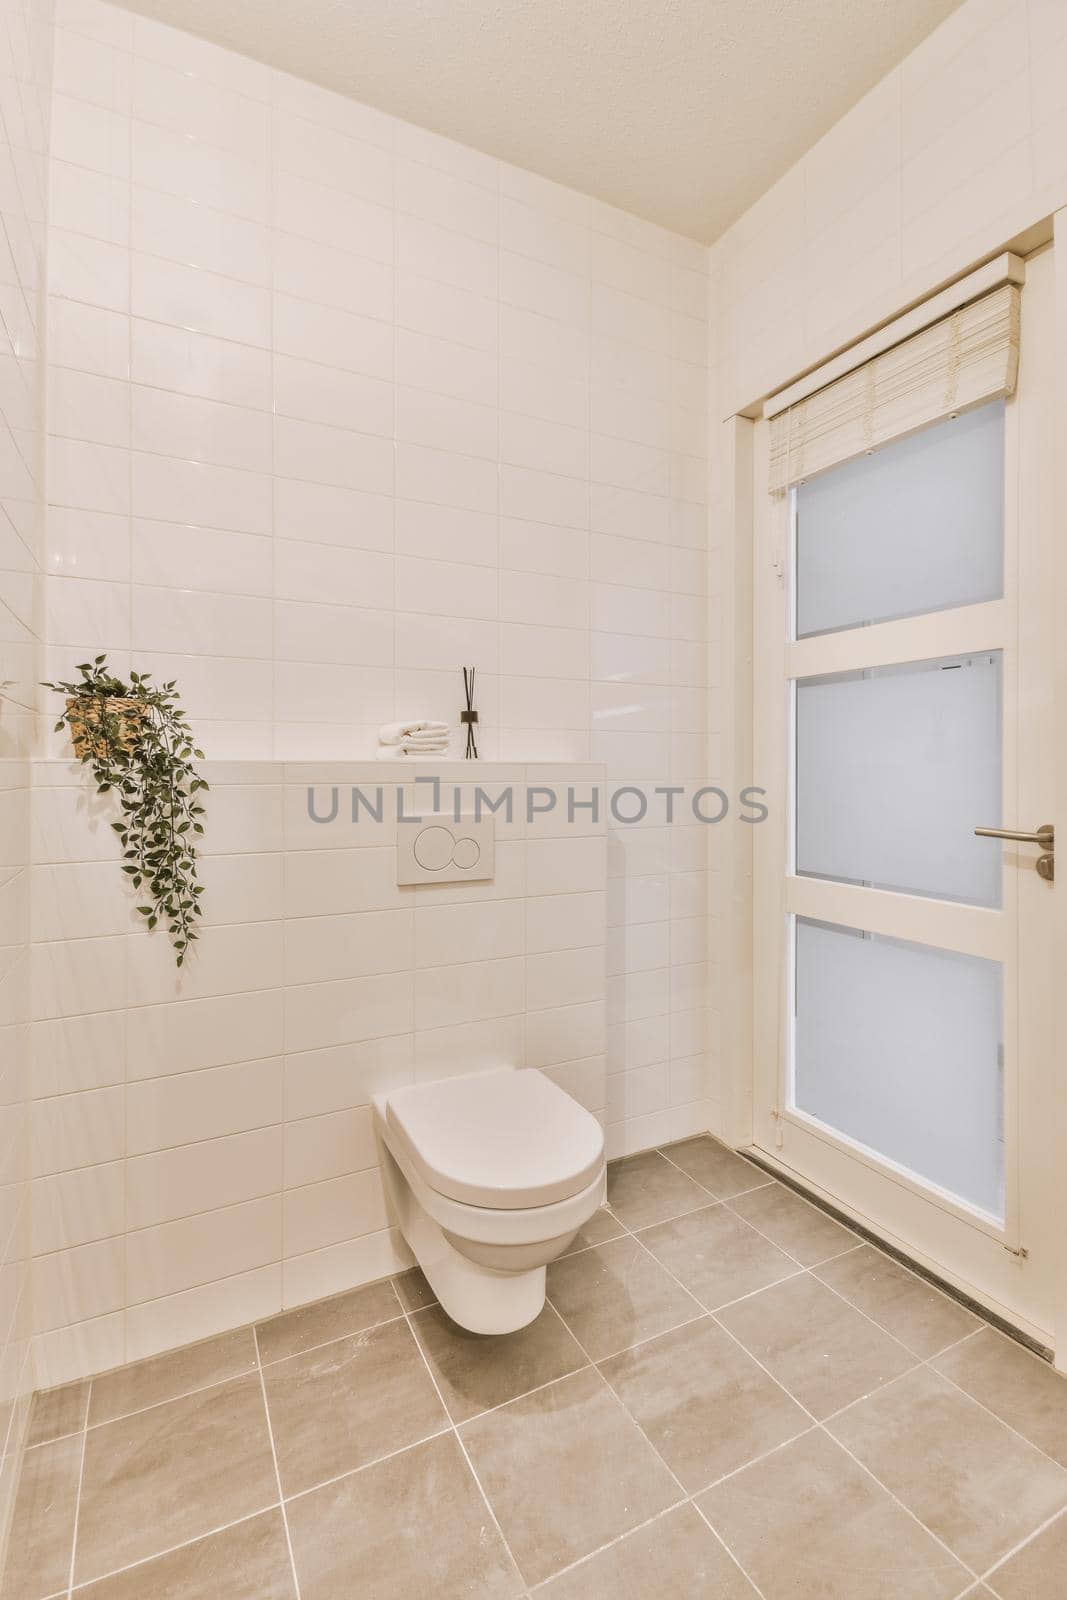 White toilet tub in a bright bathroom with white walls